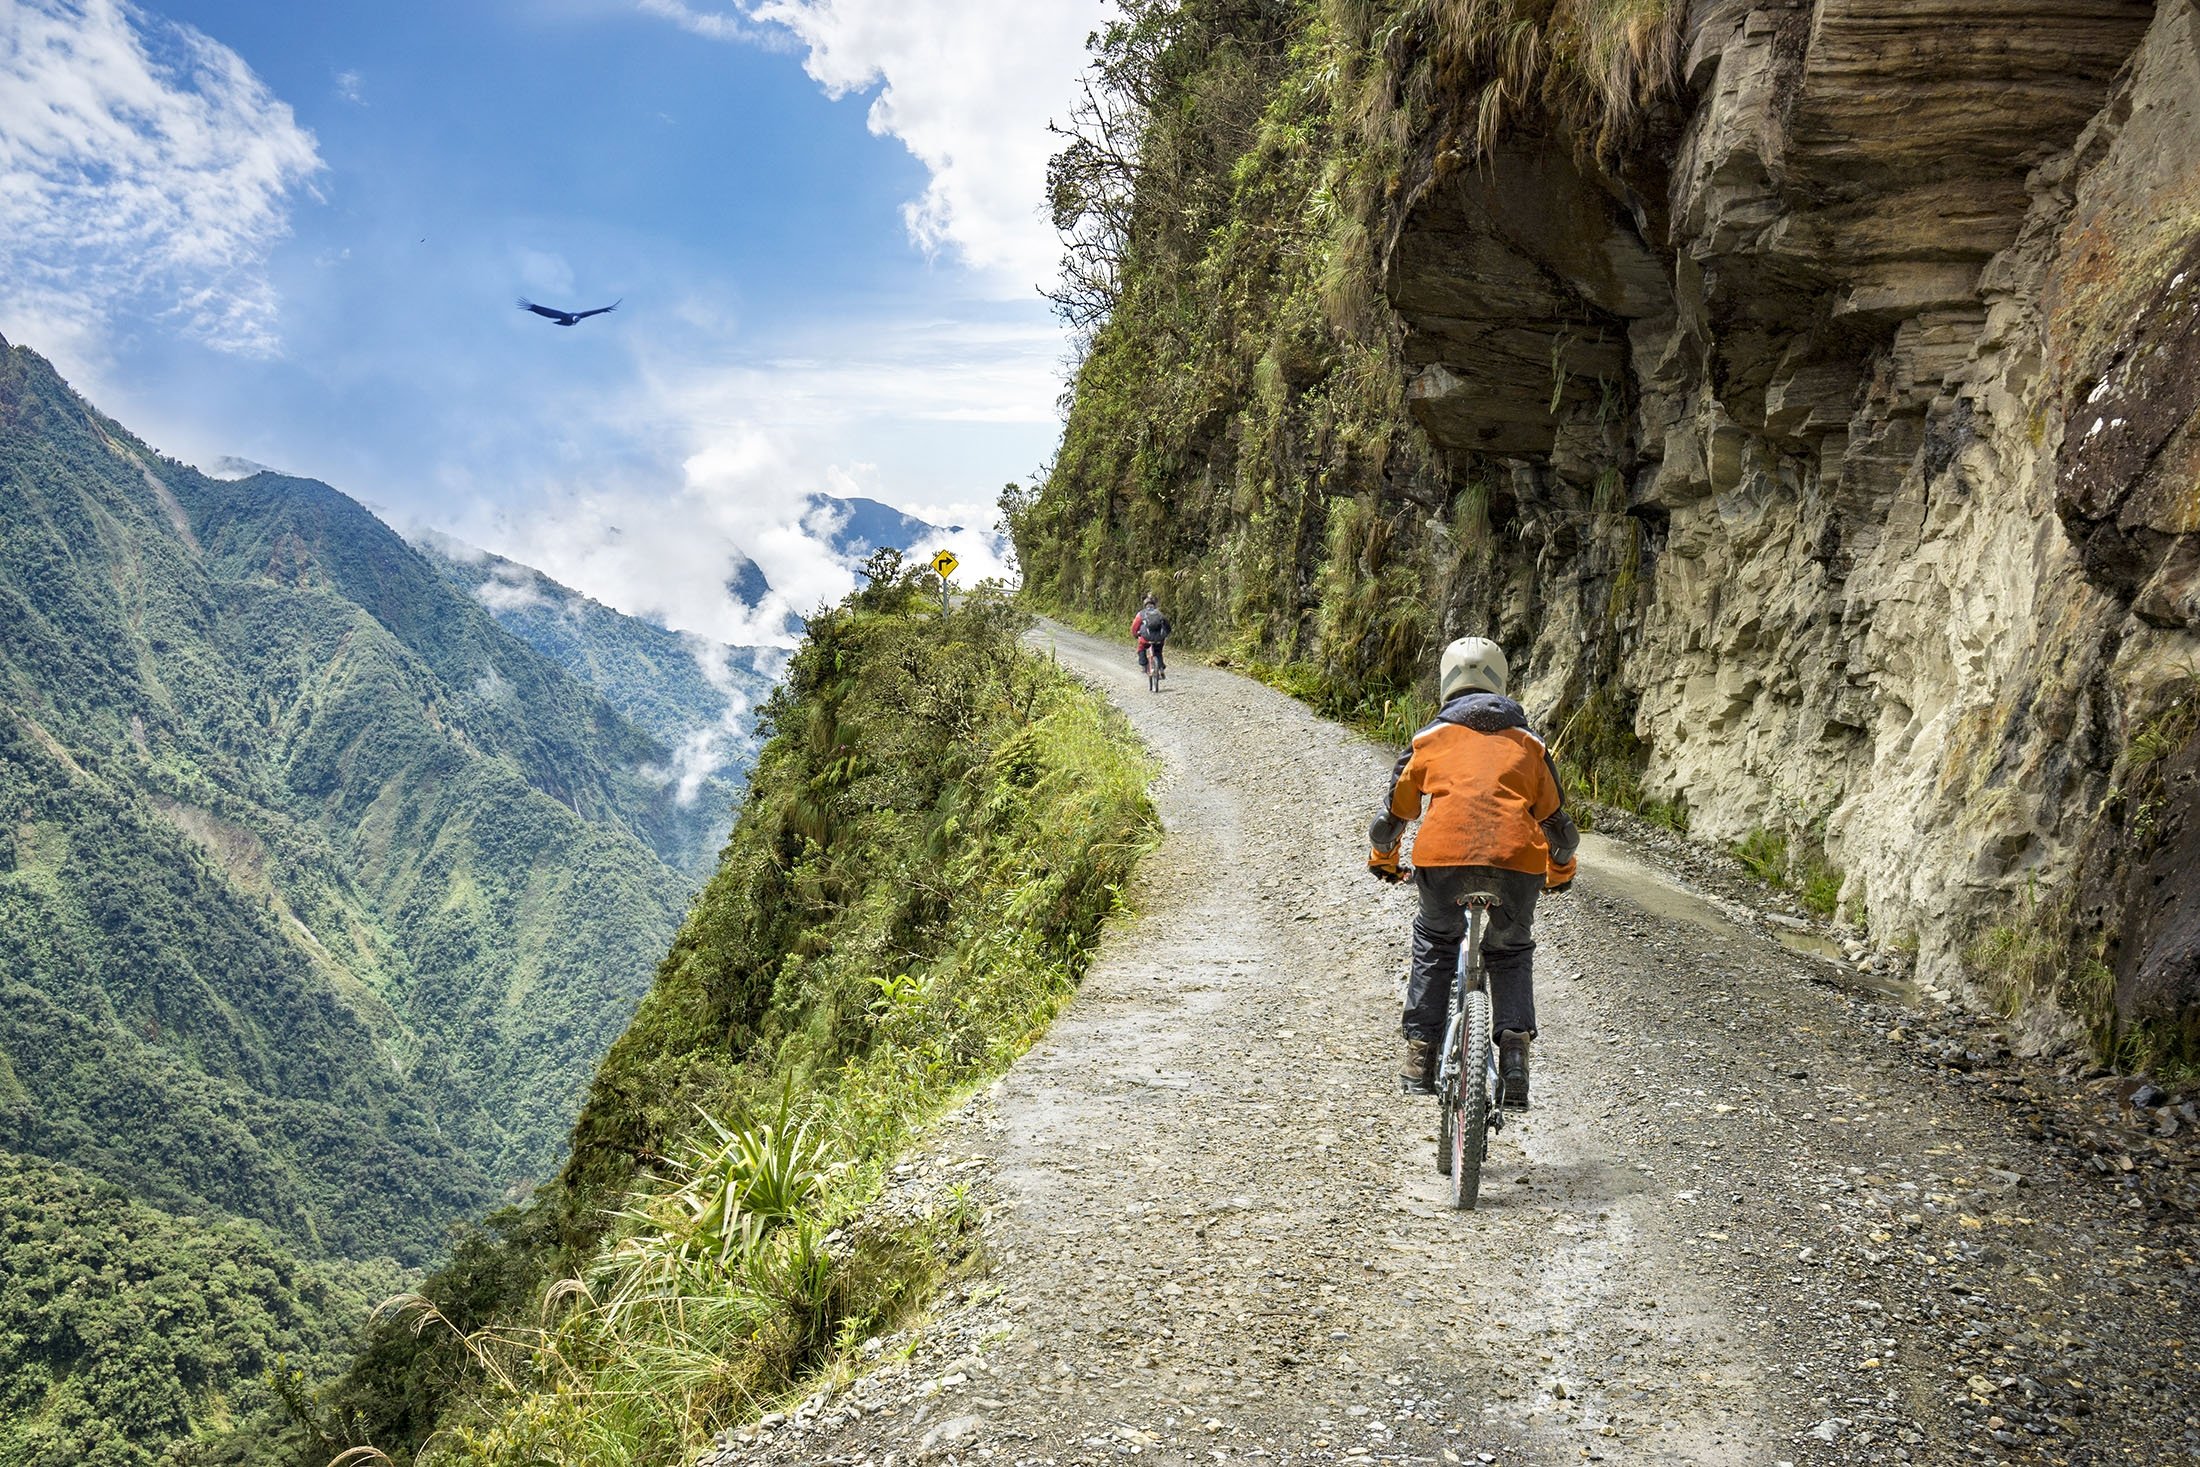 Yungas Road is a cycle route about 60 kilometers long that links the city of La Paz and the Yungas region of Bolivia, nicknamed the 